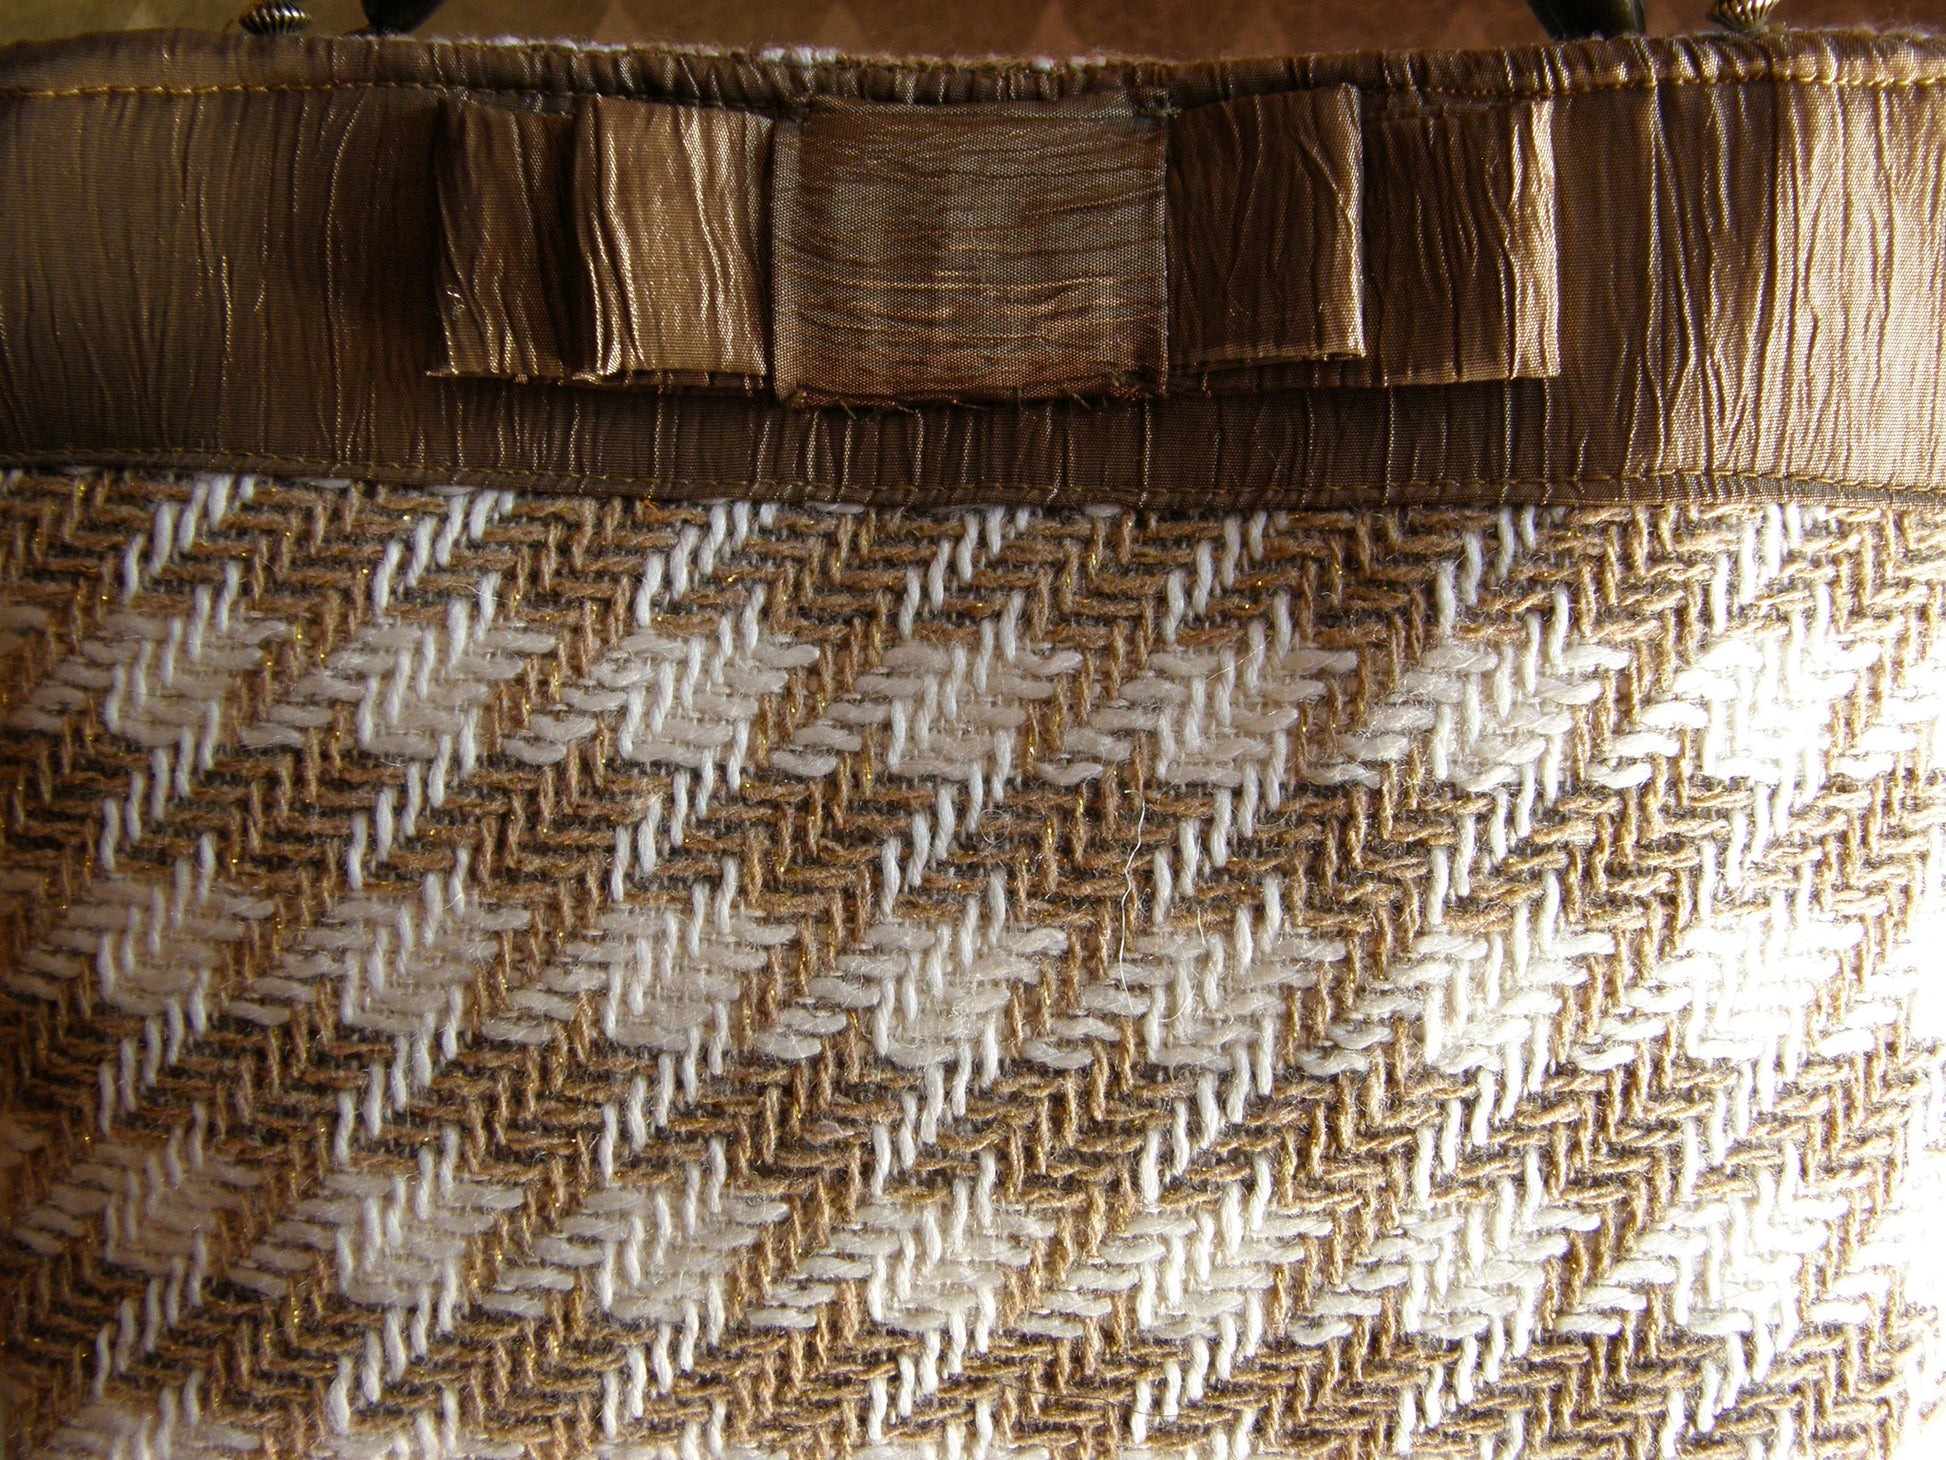 Beige and Gold Houndstooth Purse from Jenny Jag-Wear Design. Photo shows close up of the houndstooth fabric and the gold tafetta trim. THe Isabella Collection from Jenny Jag-Wear Design.